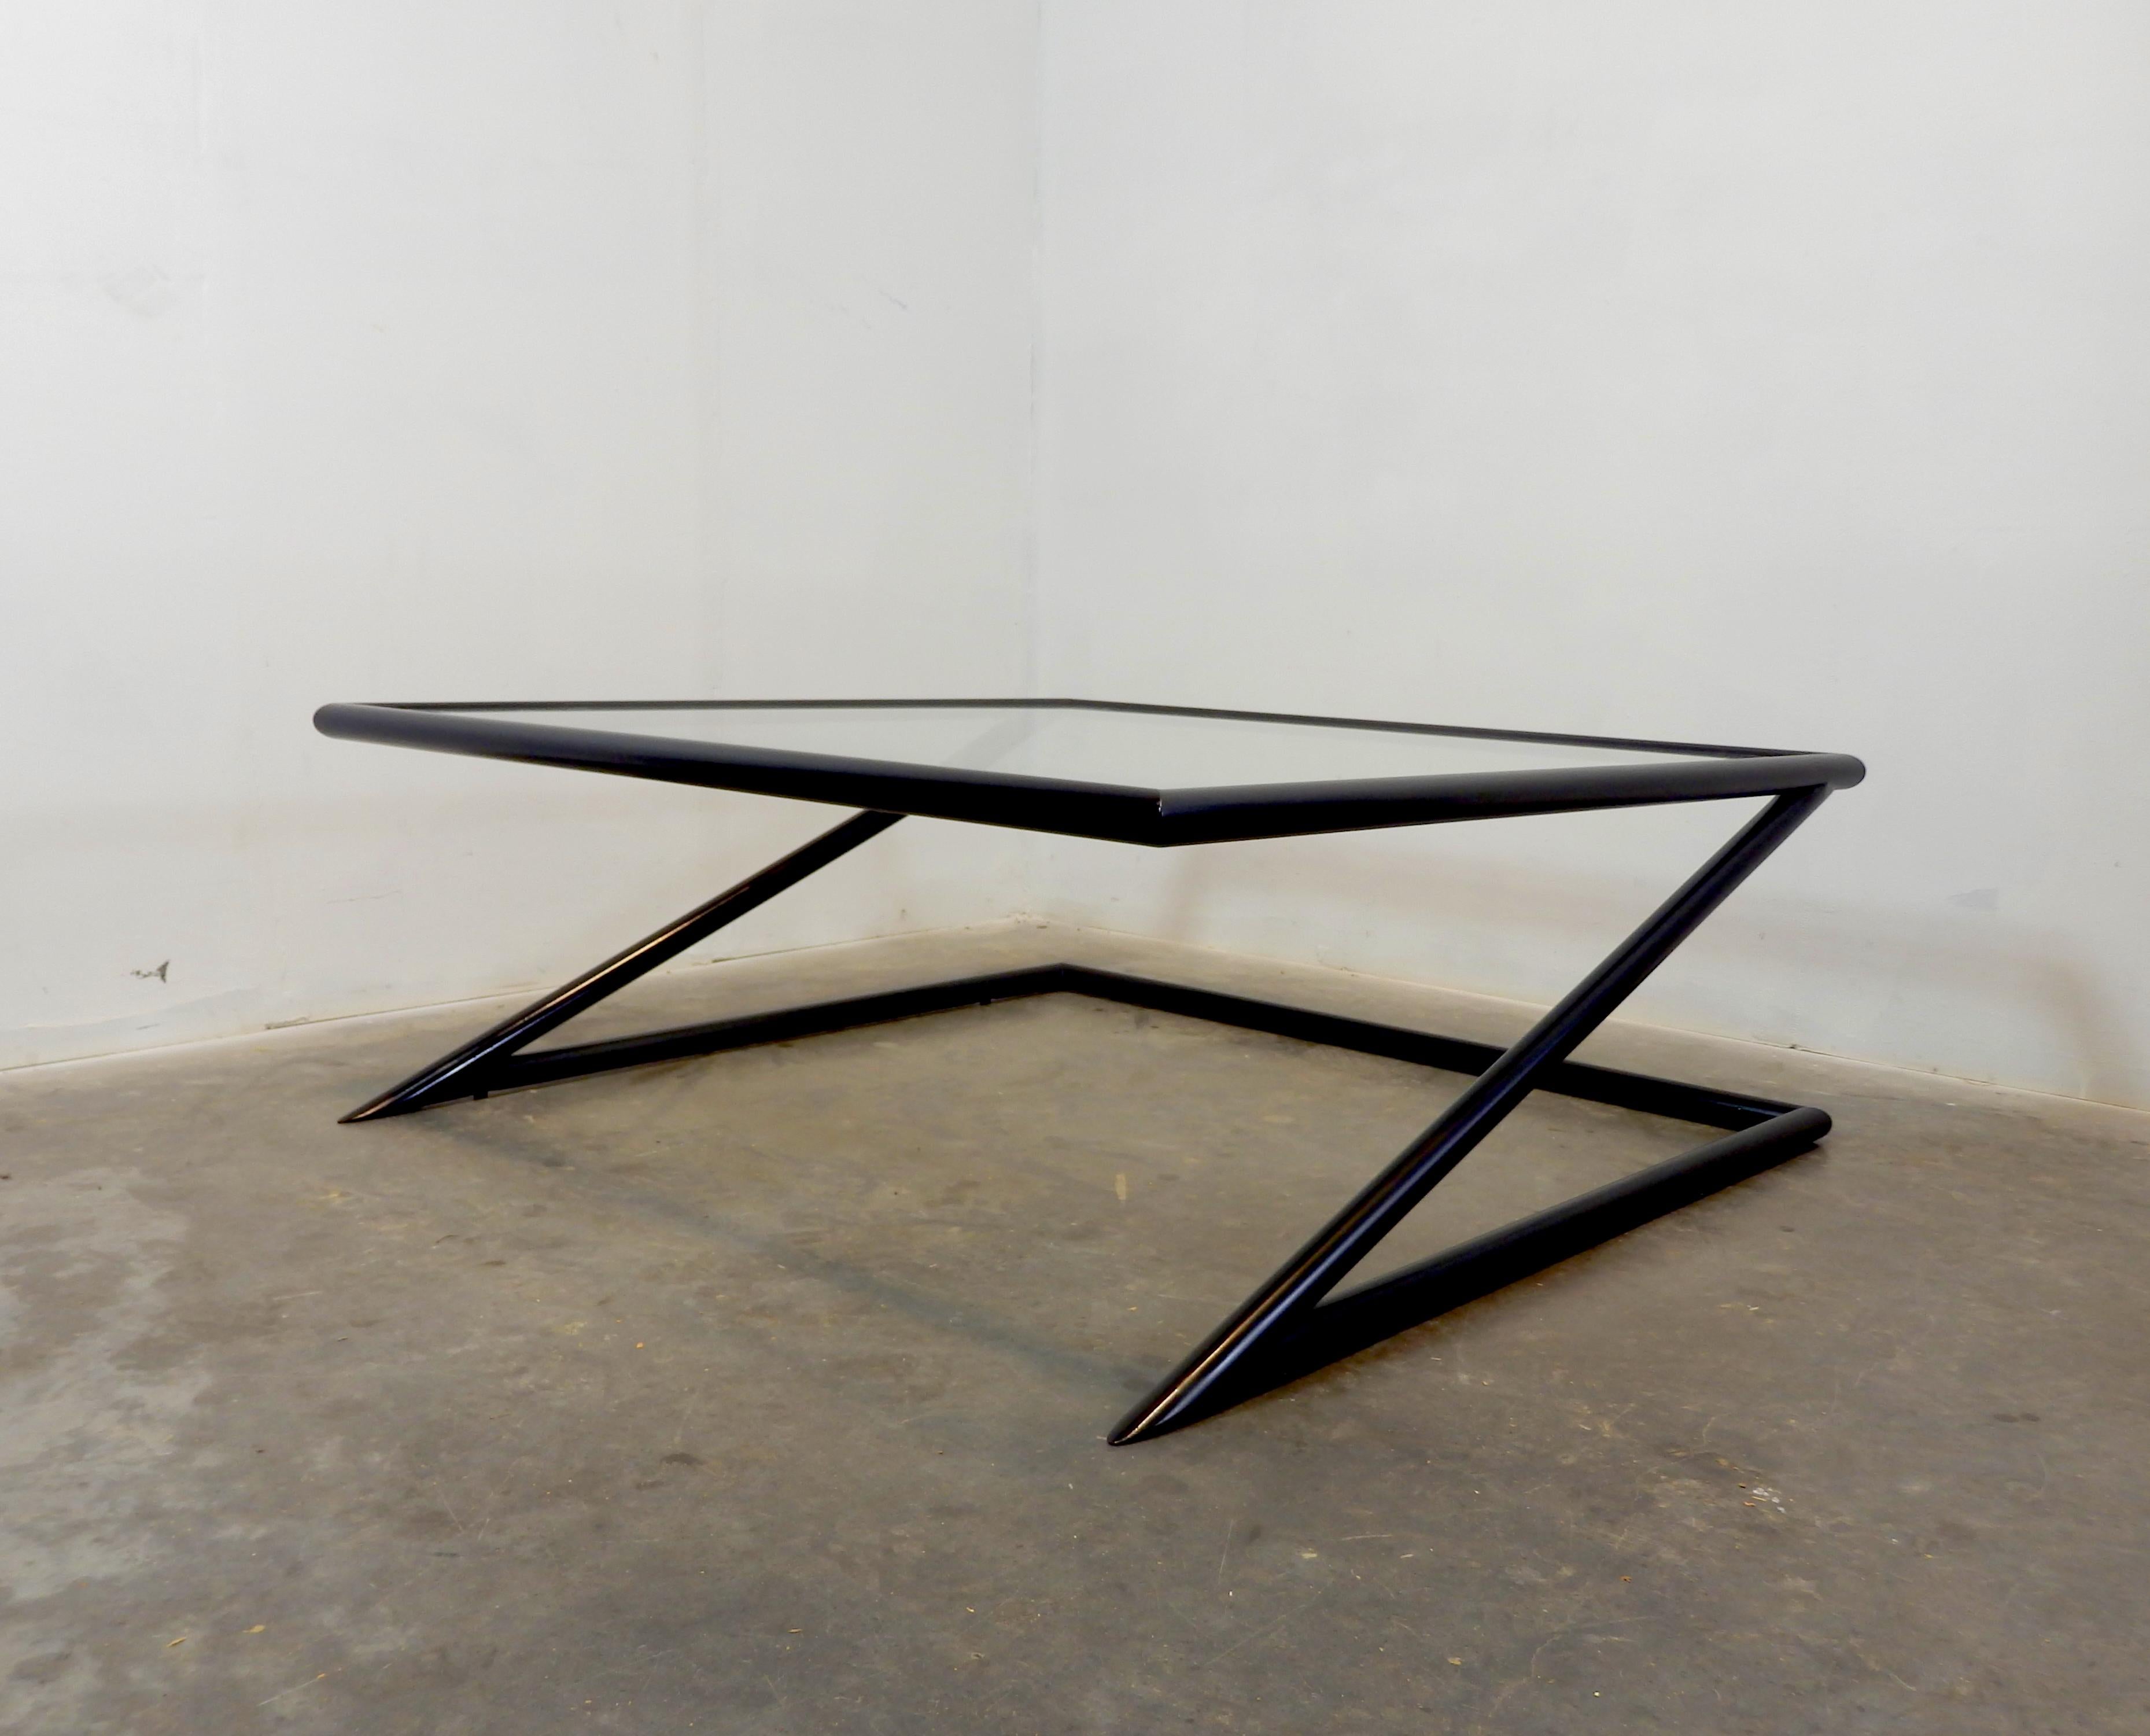 Minimalist Dutch Design 'Z' Coffee Table by Harvink, 1980s For Sale